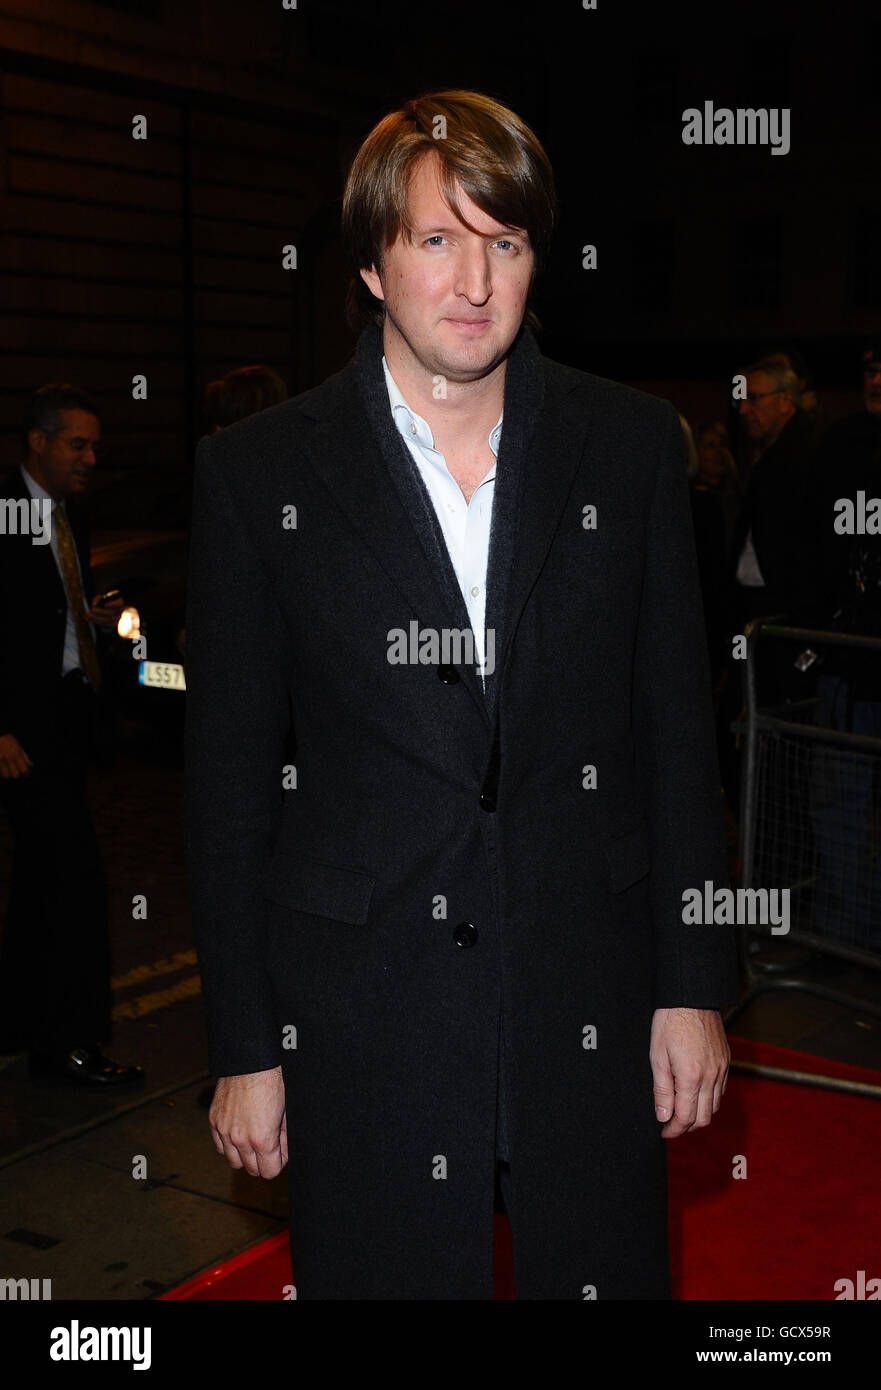 Tom Hooper arrives at a charity screening of The King's Speech at the Curzon cinema in Mayfair, London. Stock Photo